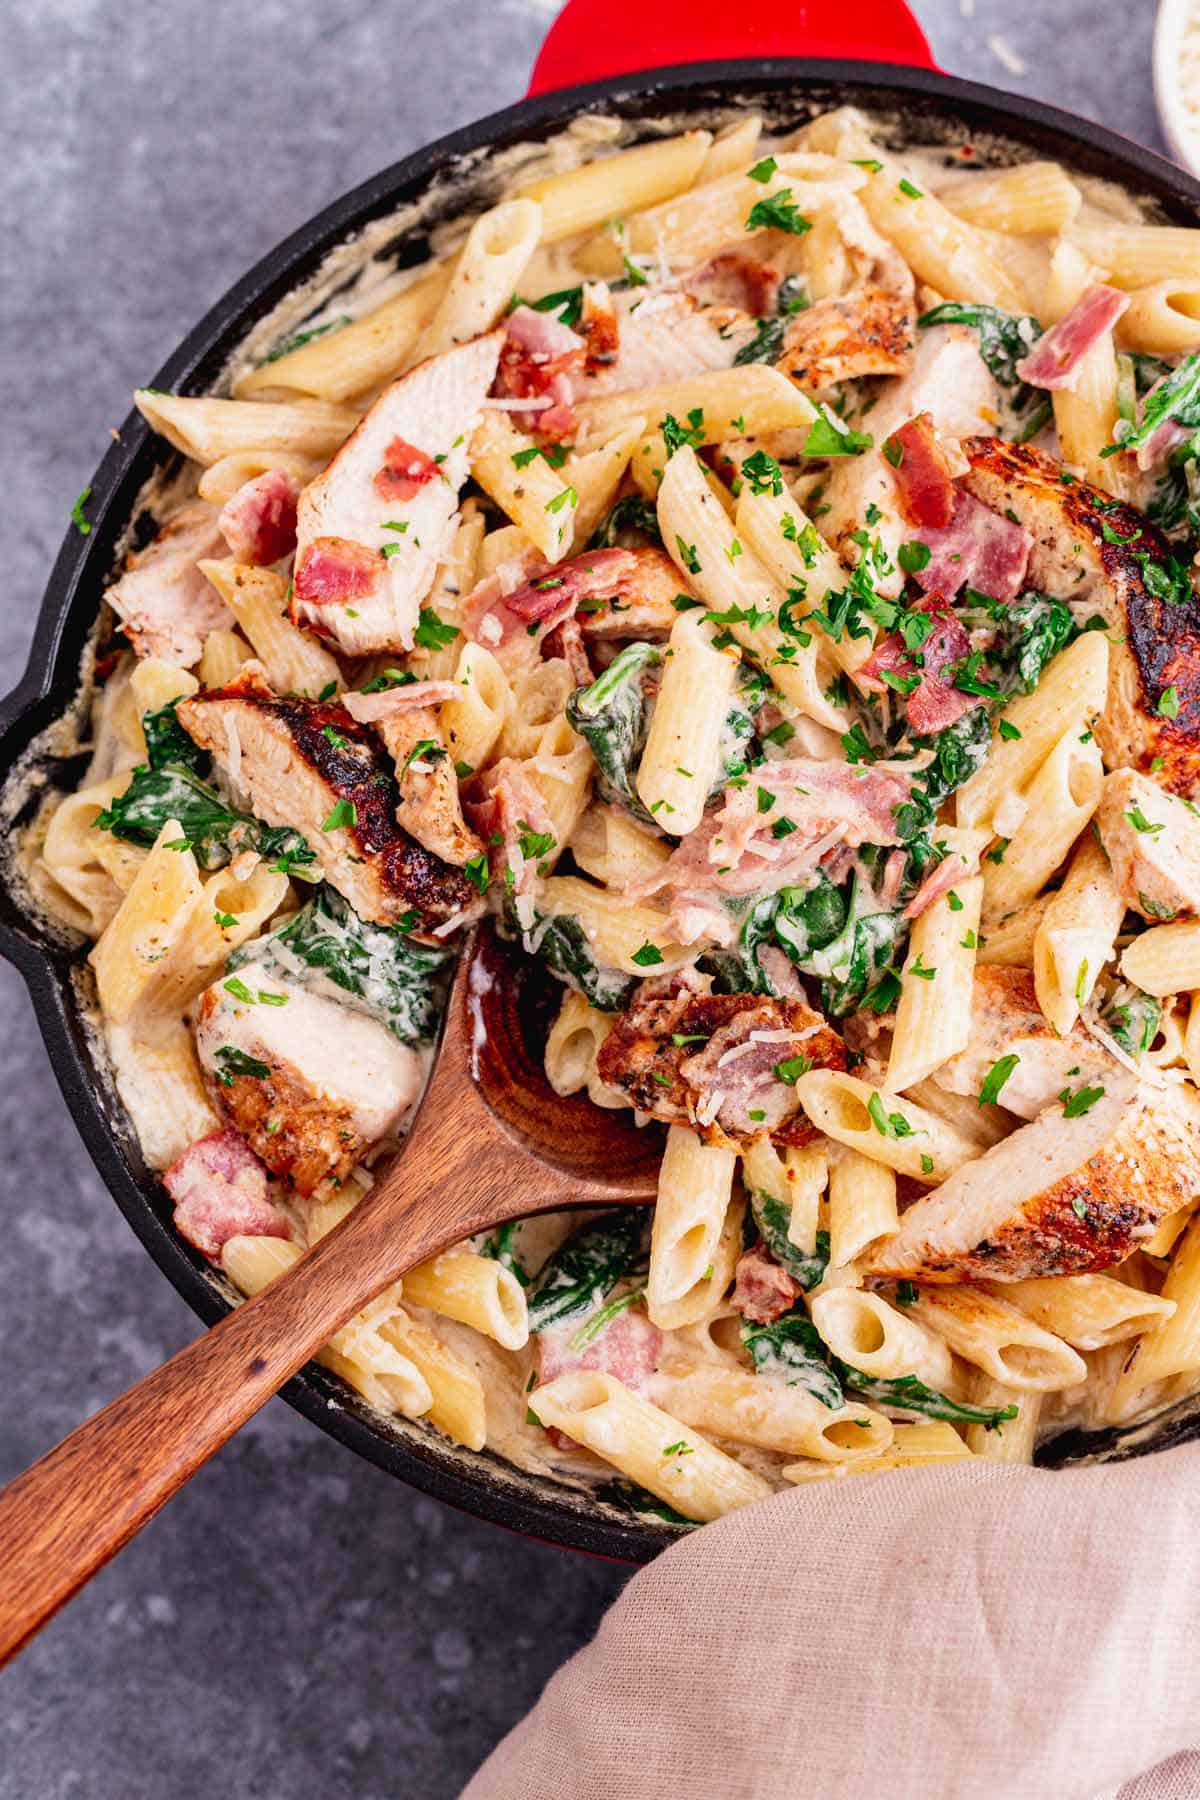 This Creamy Chicken Bacon And Spinach Pasta is one of our all-time favorite dinner recipes. Tender juicy chicken over pasta in a rich creamy sauce with spinach and bacon. An excellent easy weeknight or weekend dinner recipe for the whole family. Yum! - The Yummy Bowl